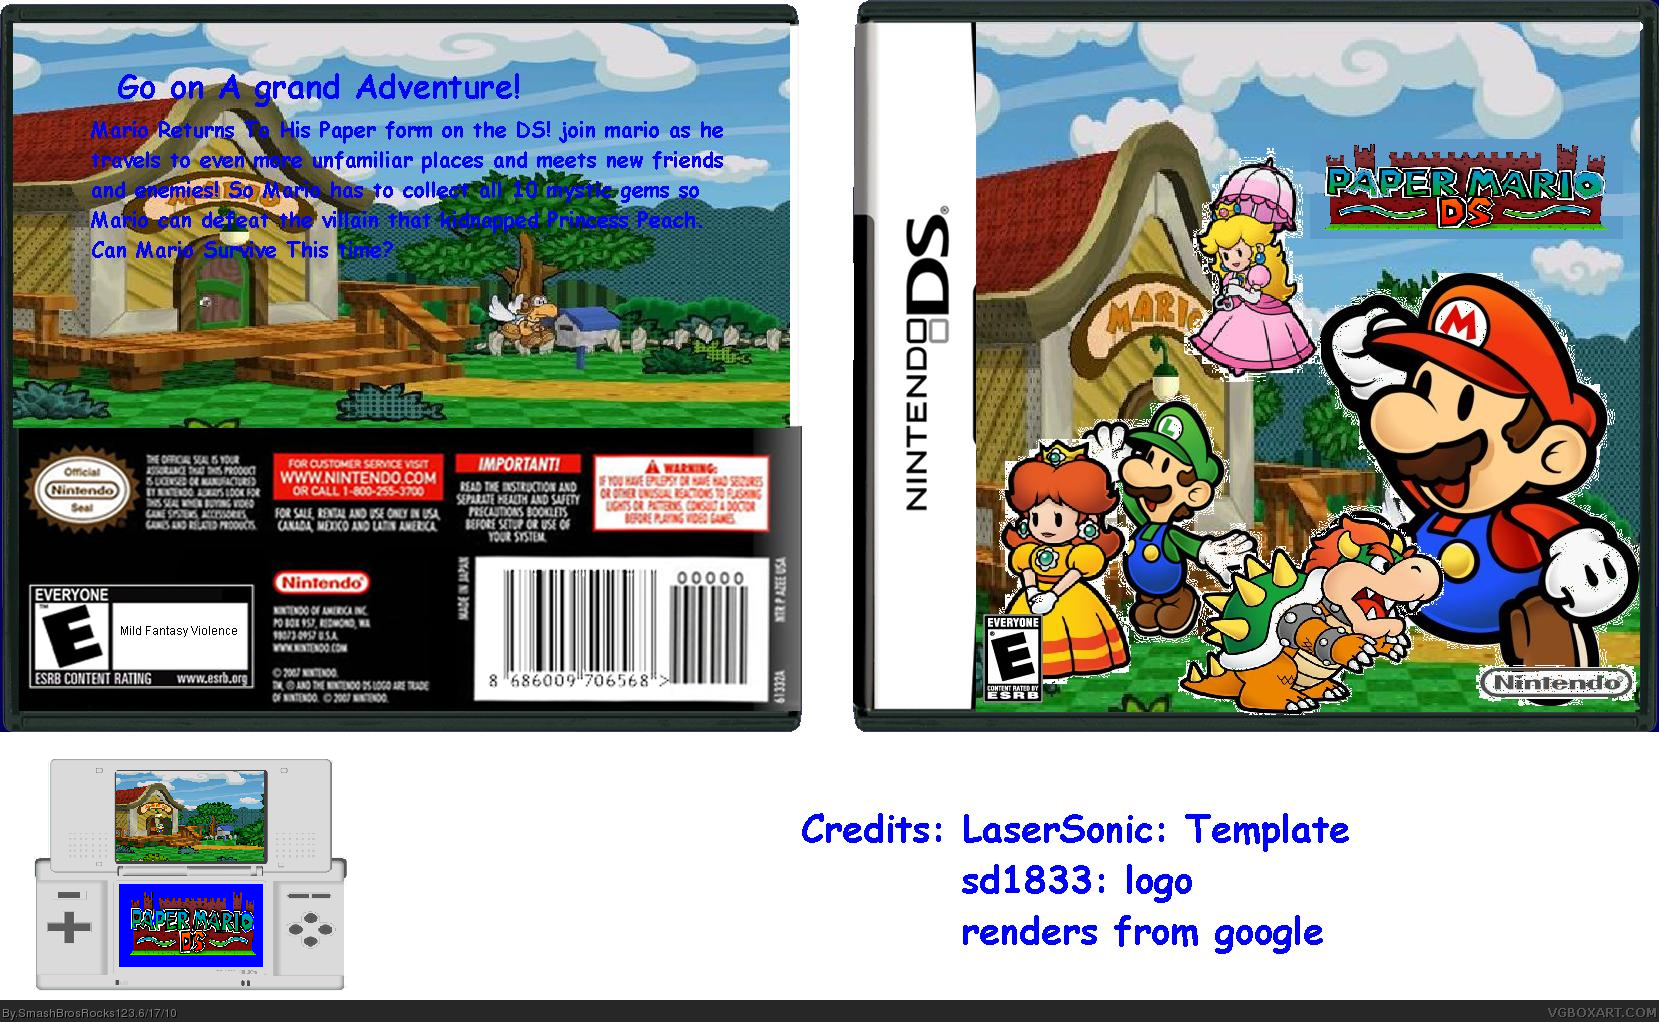 viewing-full-size-paper-mario-ds-box-cover